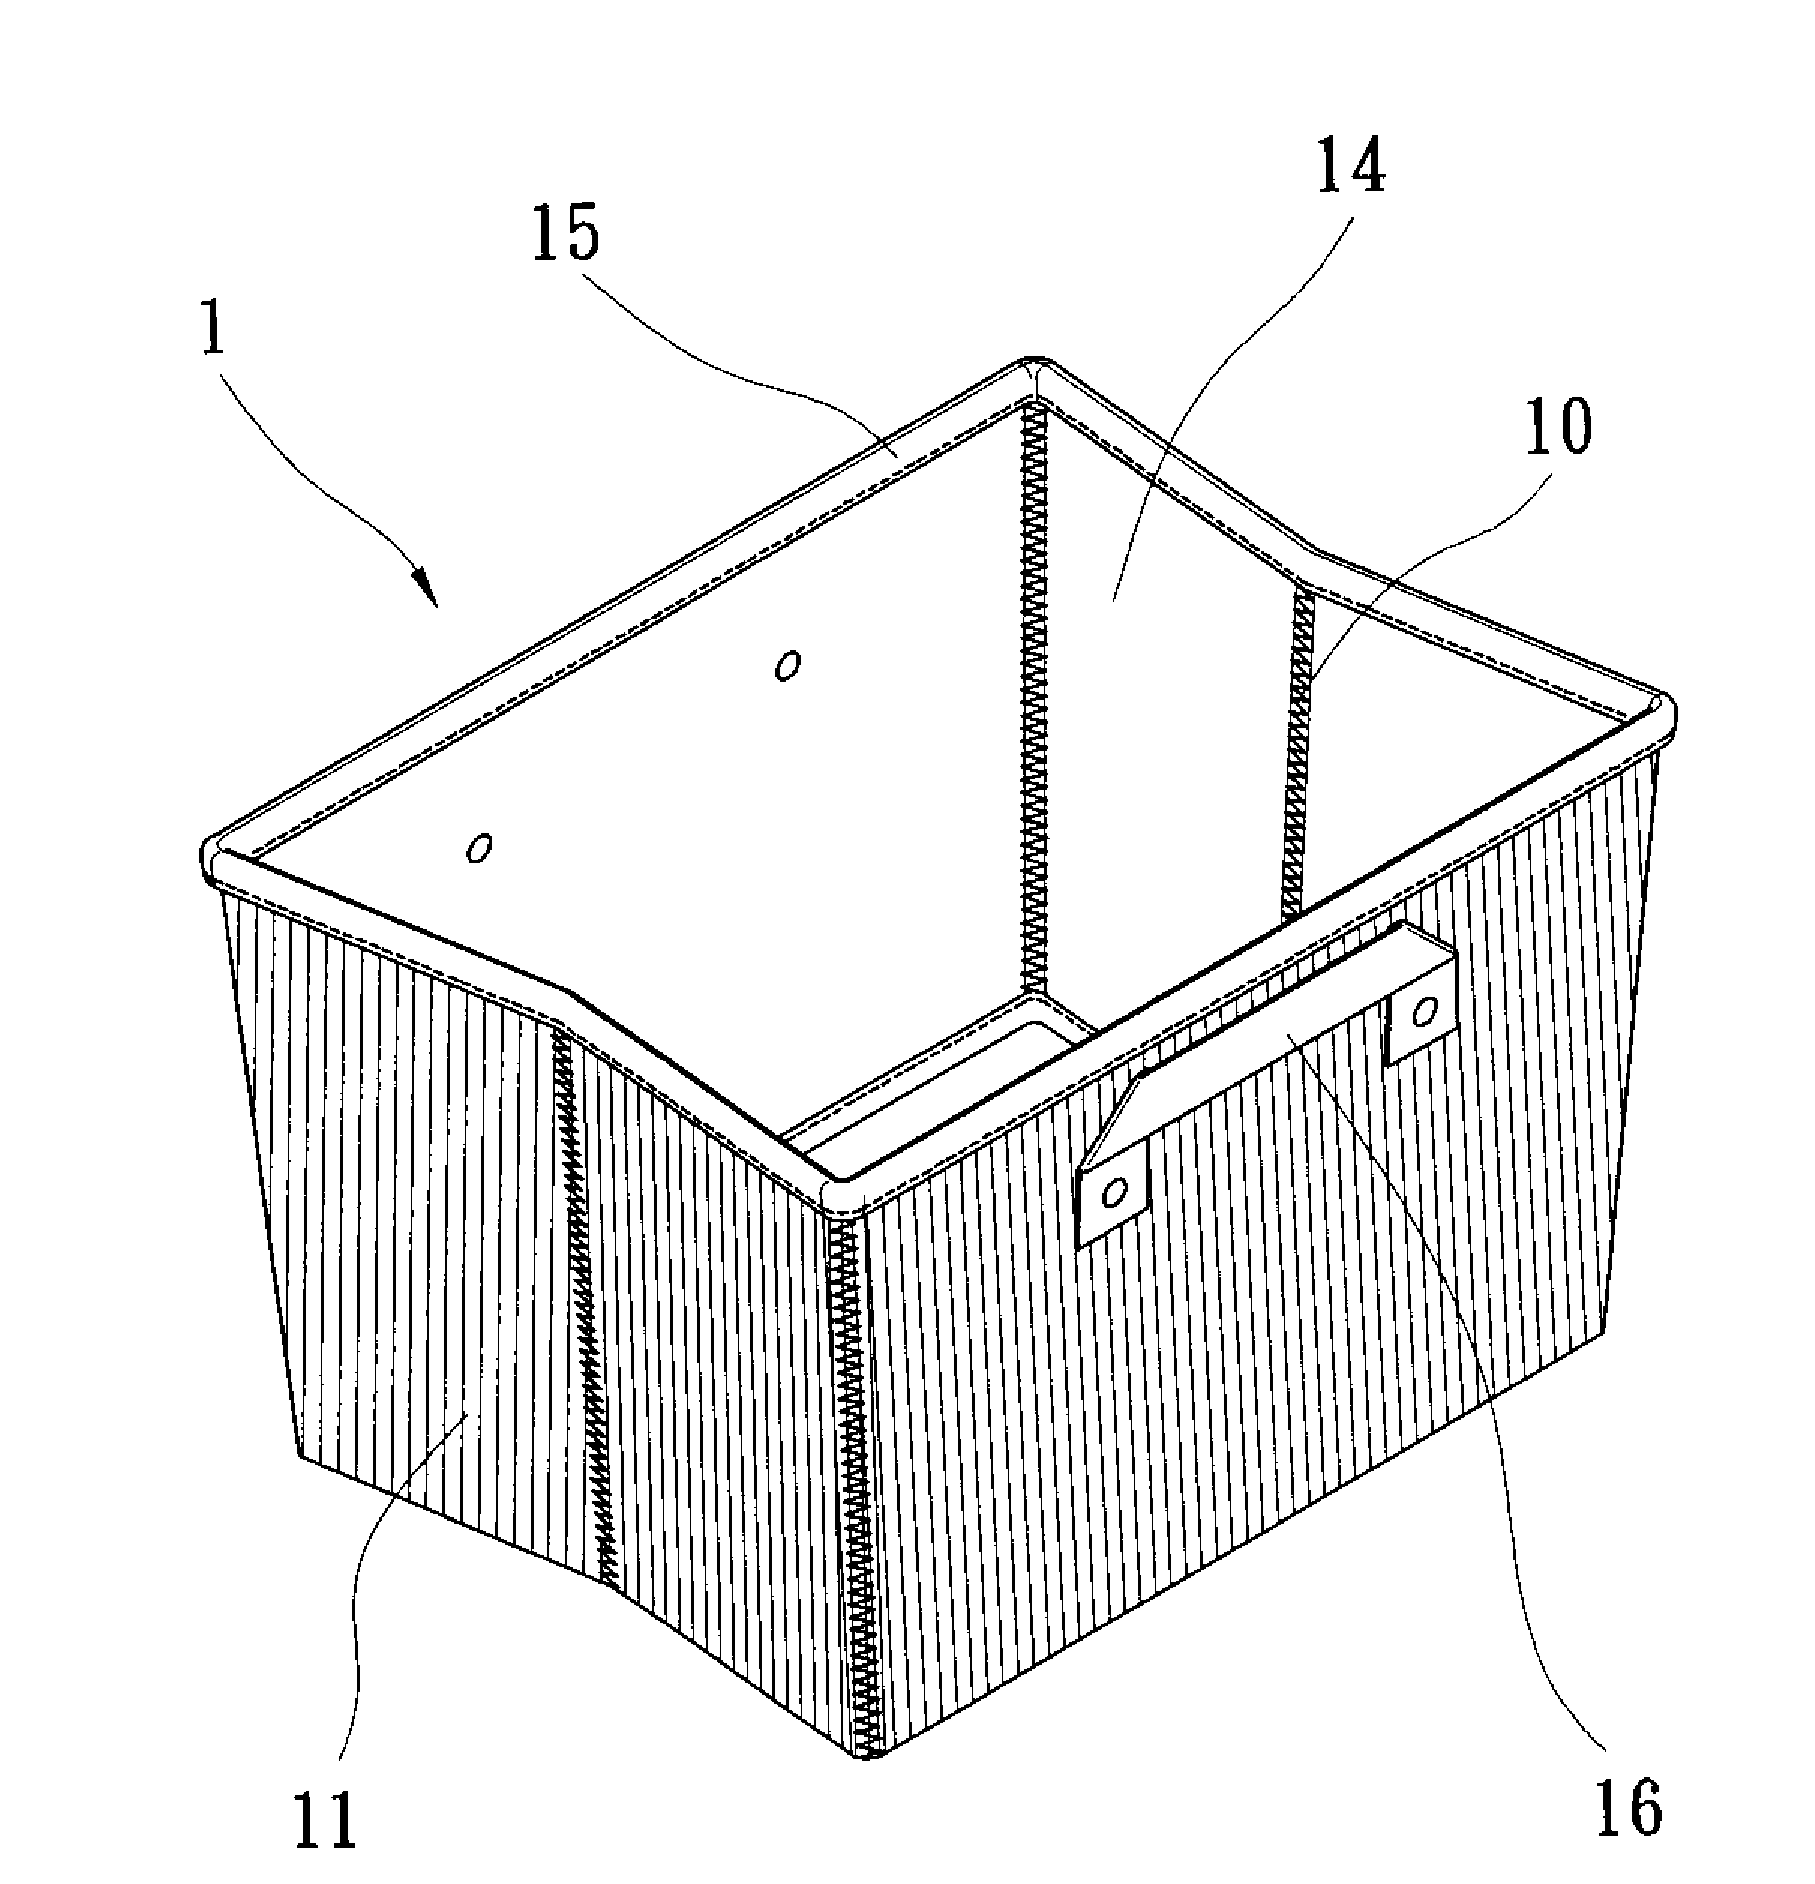 Structure of box